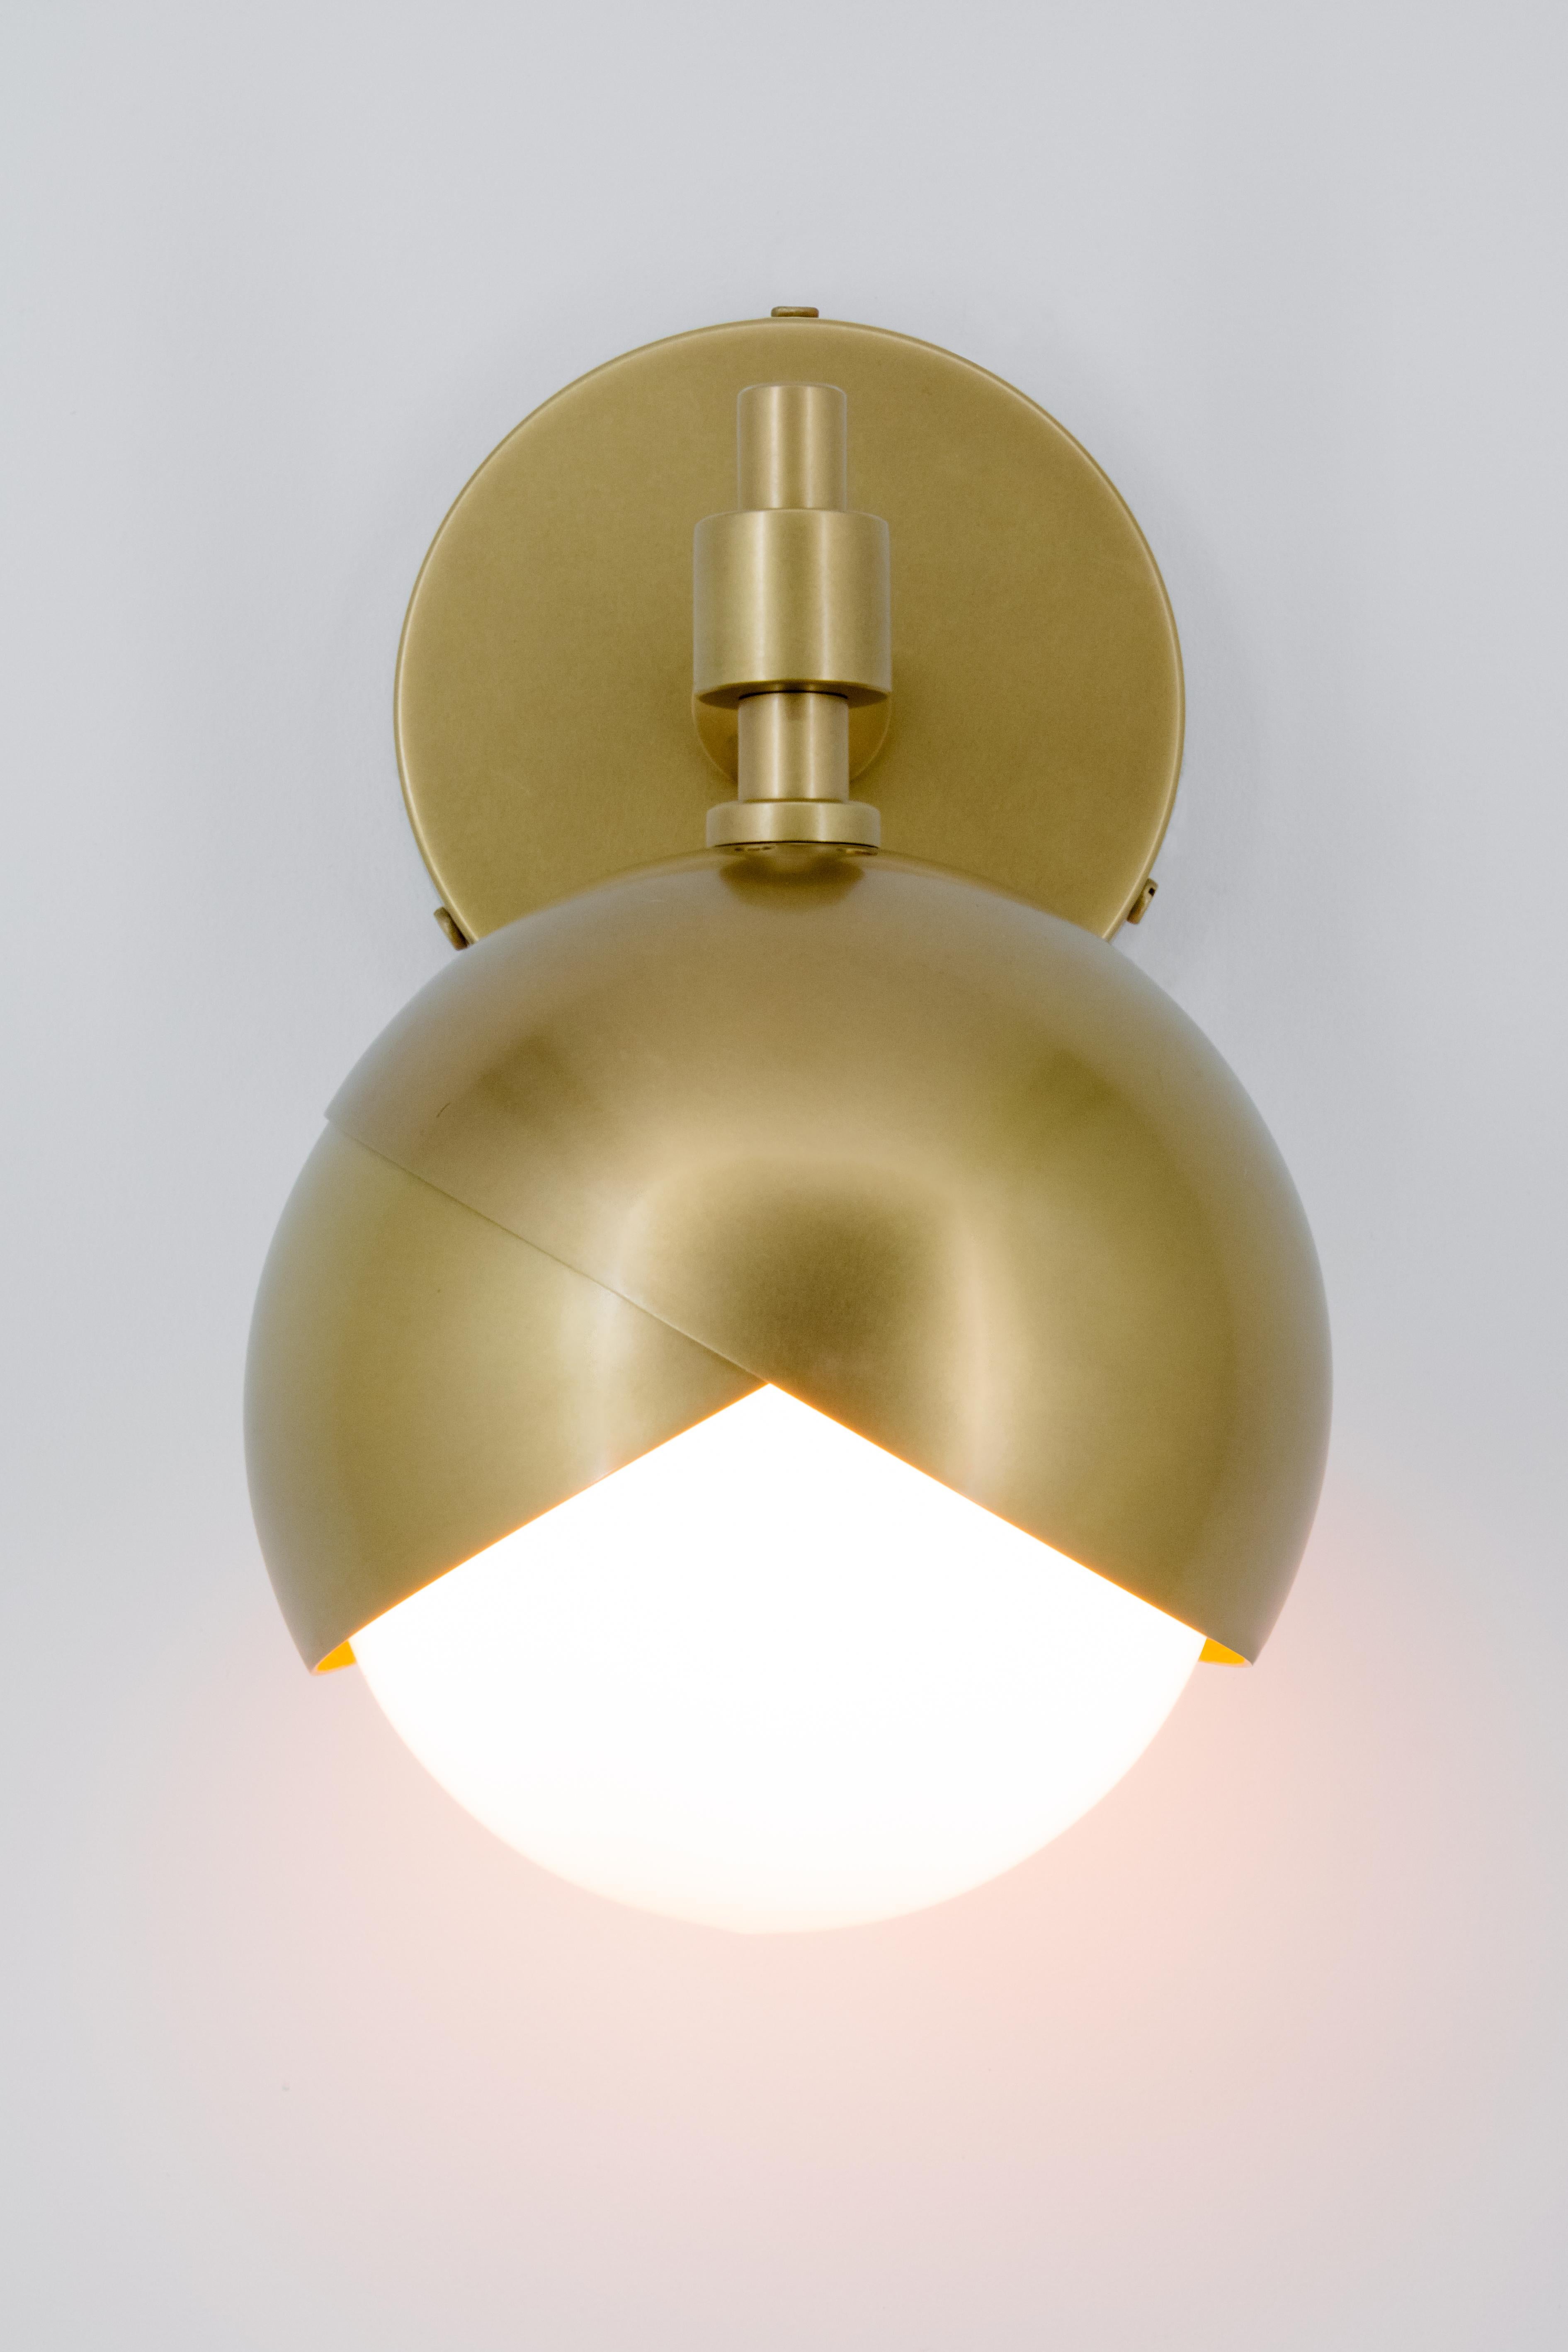 Benedict Simple Sconce in Matte White Powder Coat and Satin Nickel In New Condition For Sale In Brooklyn, NY